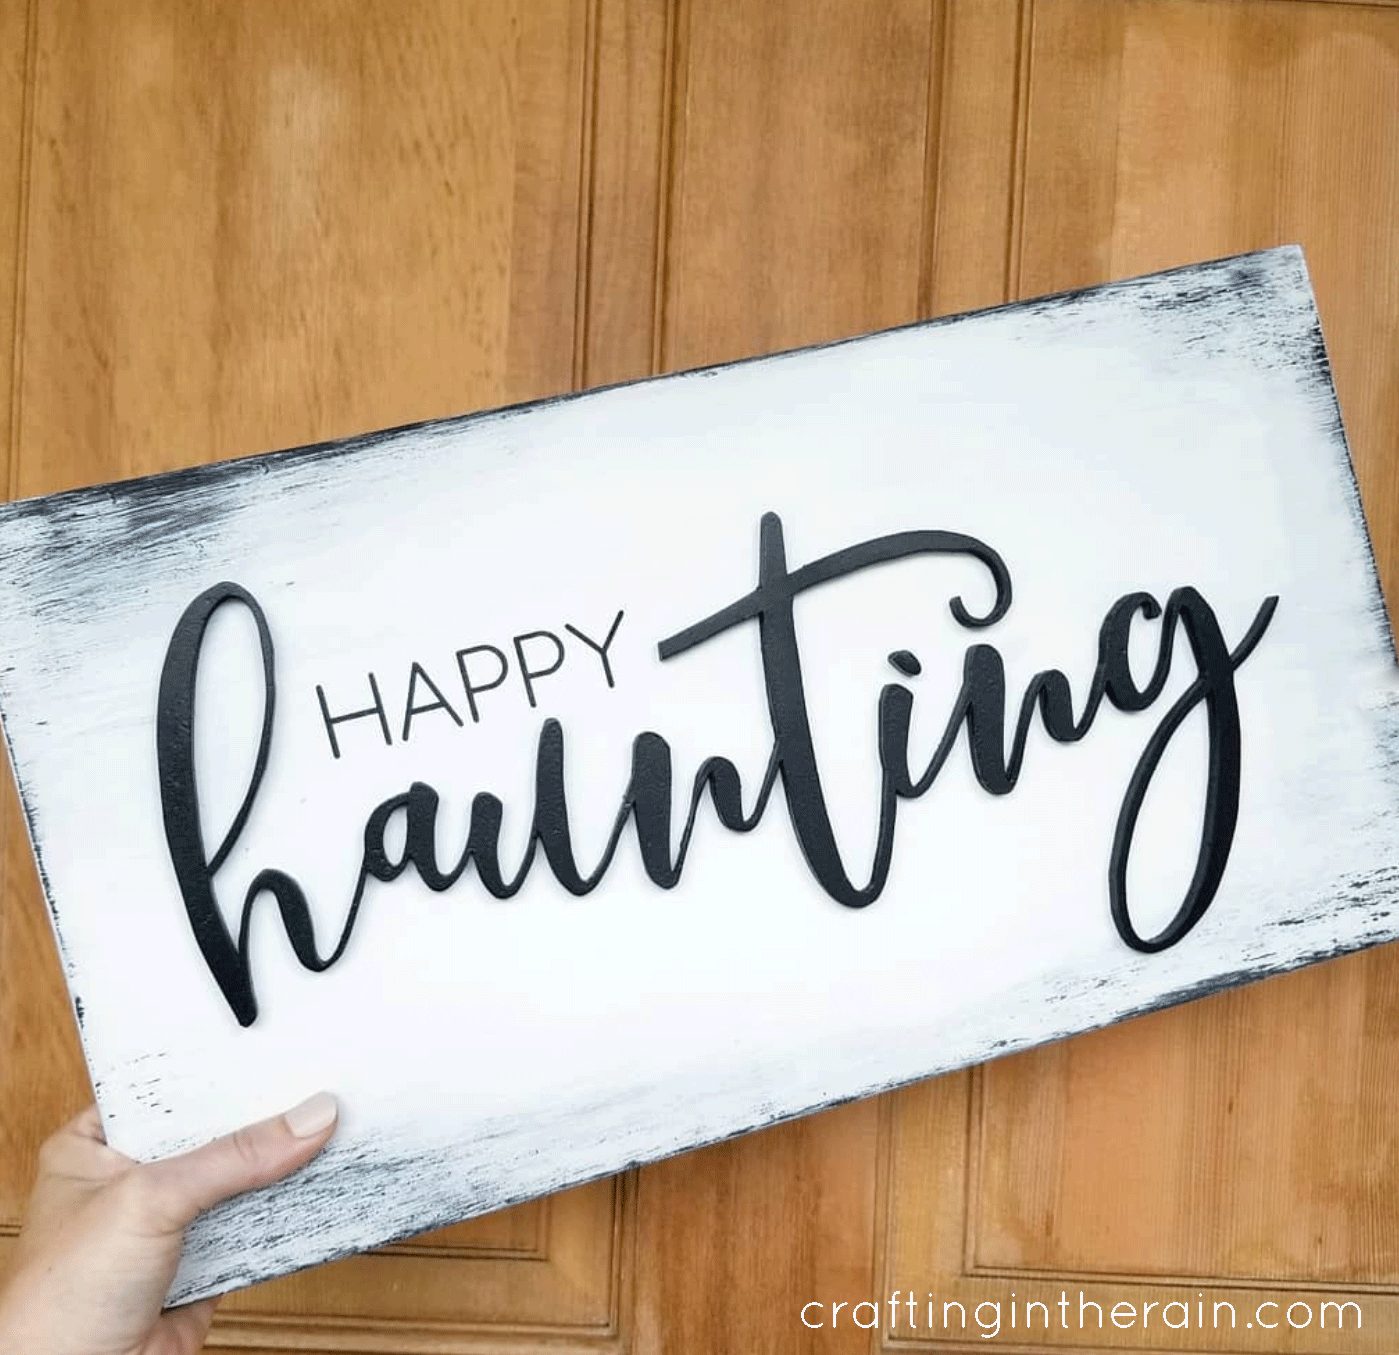 HAPPY HAUNTING - CRAFTING IN THE RAIN